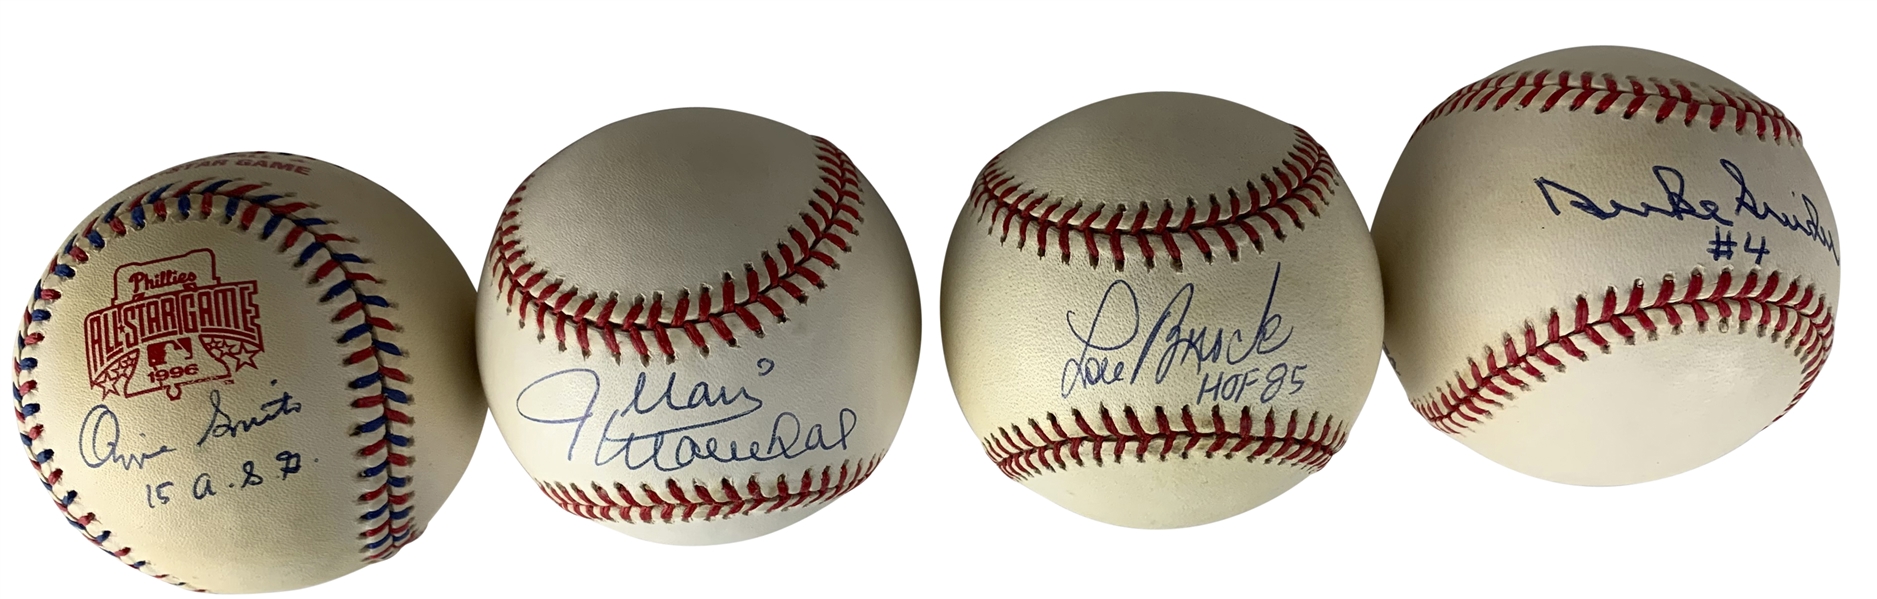 National League Lot of Four (4) Signed Baseballs w/ Schmidt, Snider & Others! (Beckett/BAS Guaranteed)